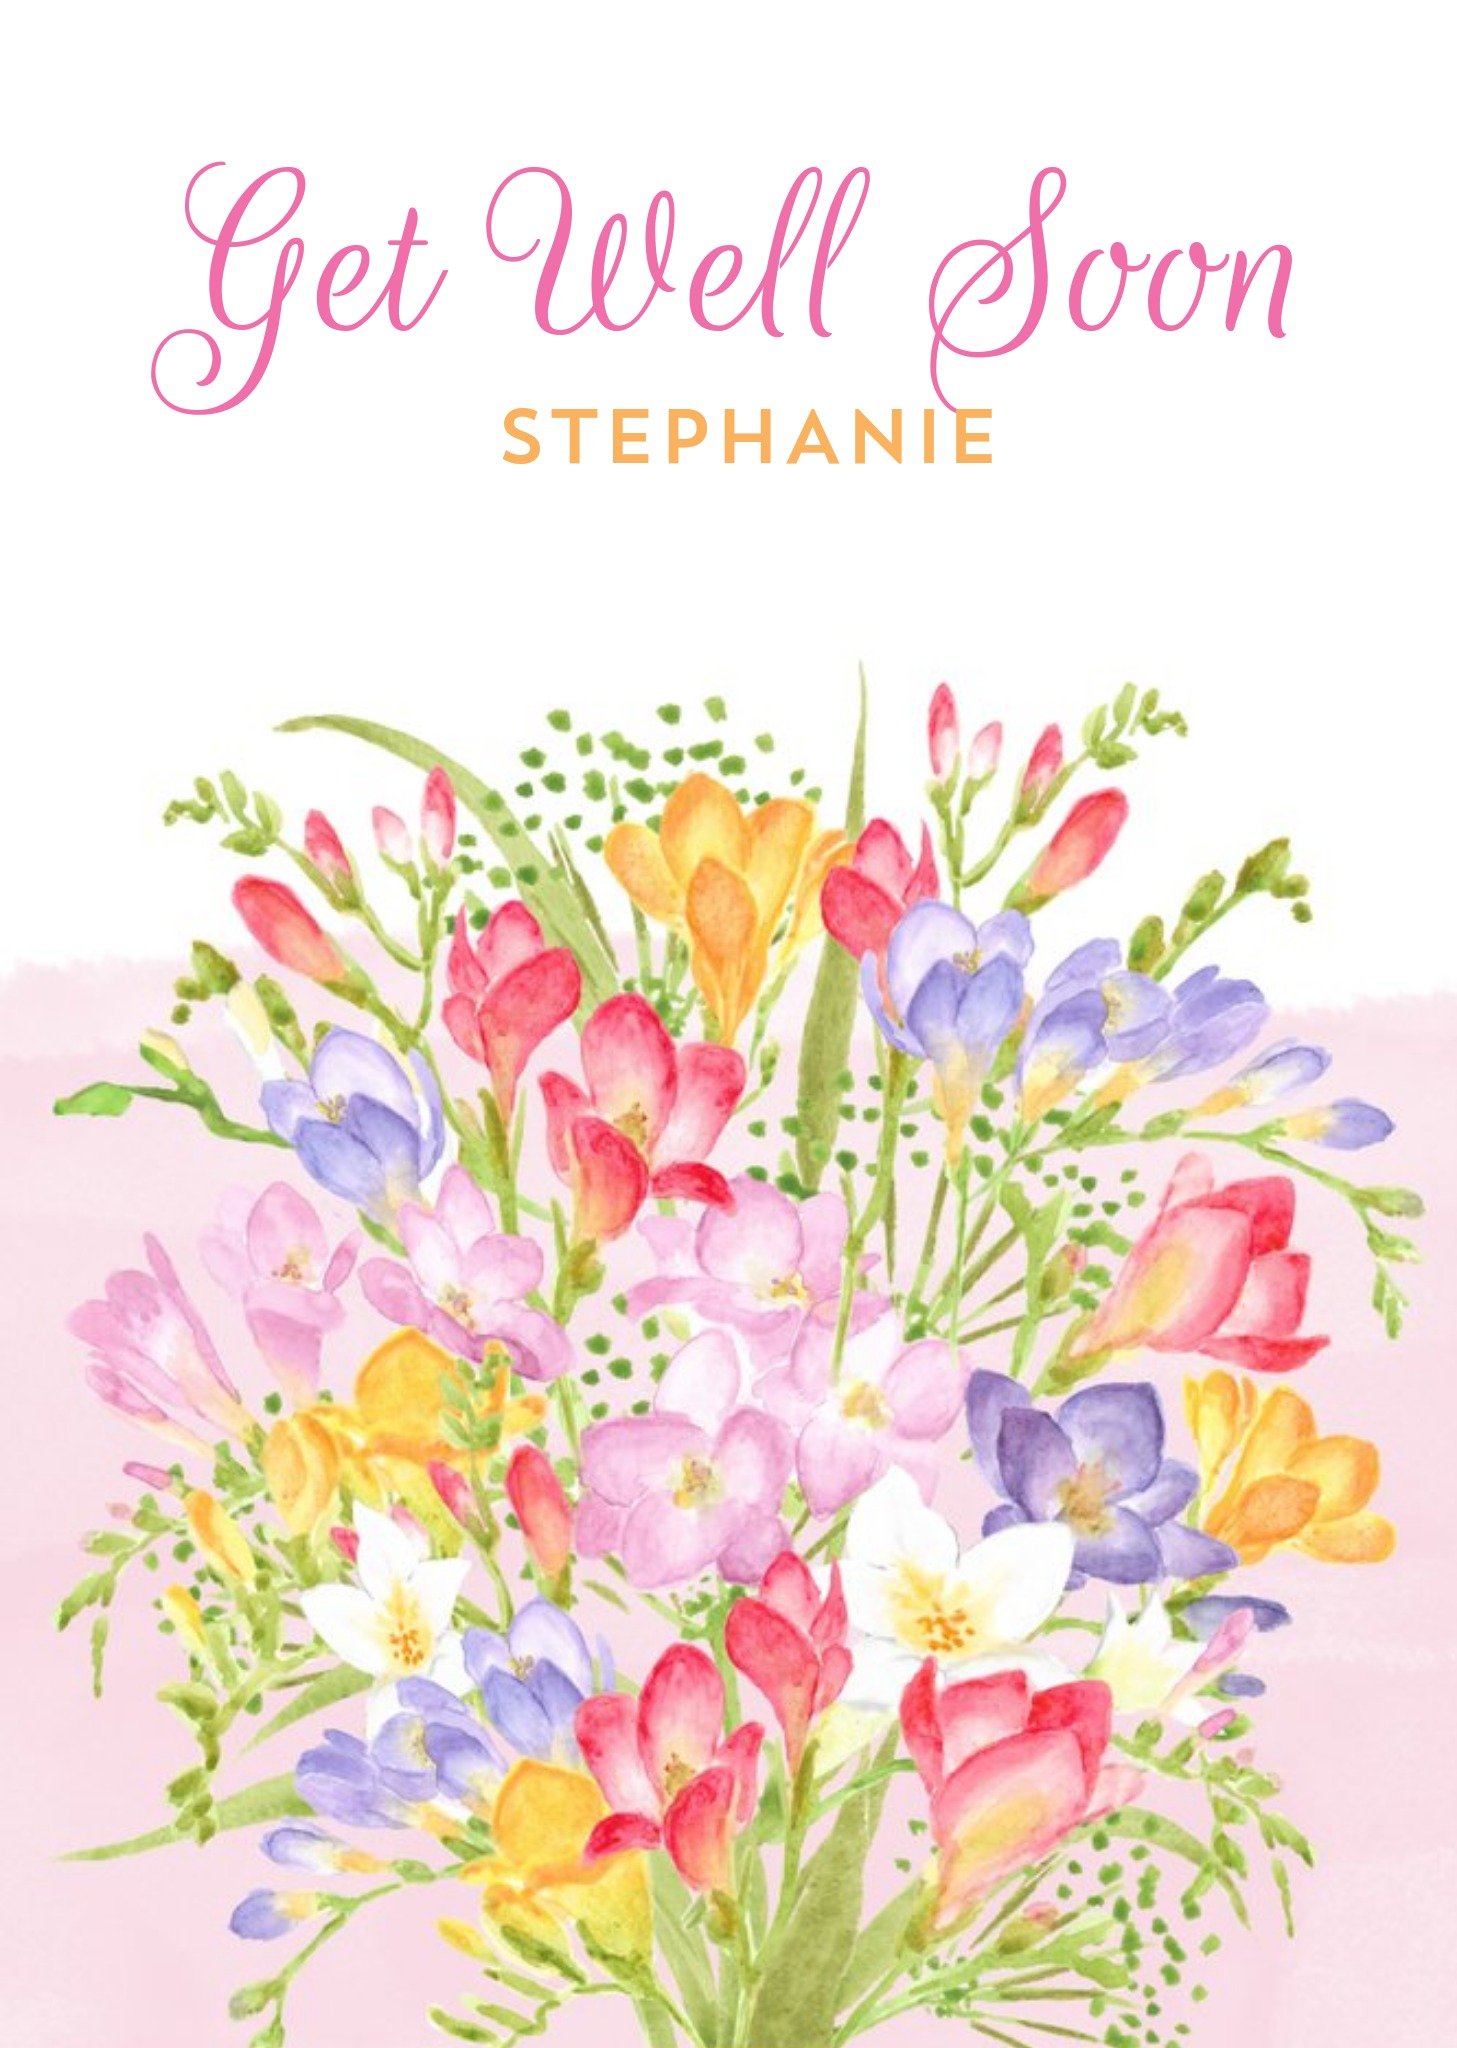 Moonpig Illustration Of A Bouquet Of Flowers Get Well Soon Card Ecard